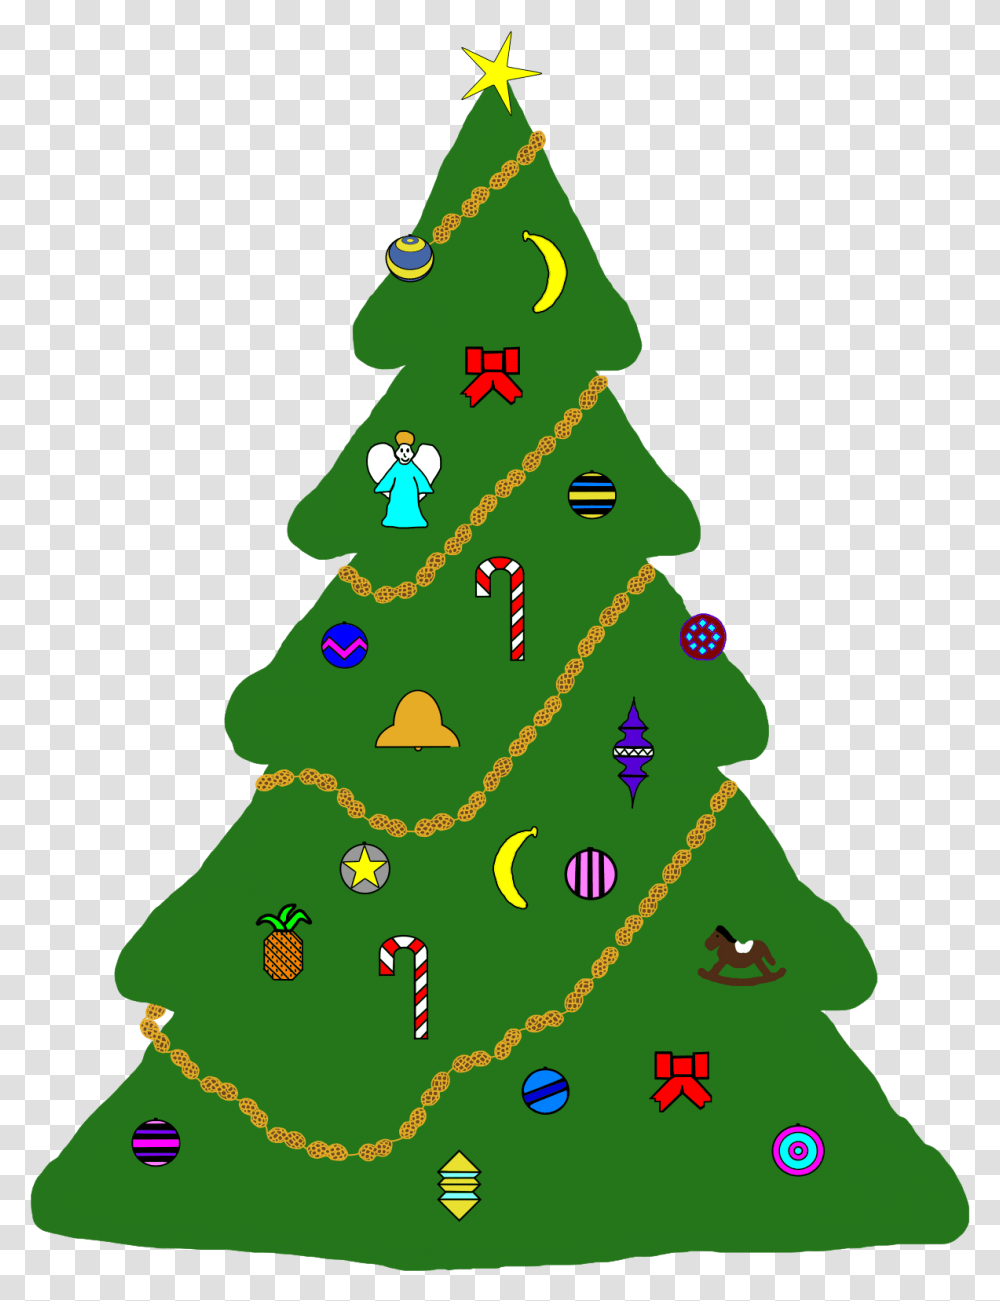 Christmas Tree For Monkeys Clip Arts Christmas Tree, Plant, Ornament, Star Symbol, Outdoors Transparent Png